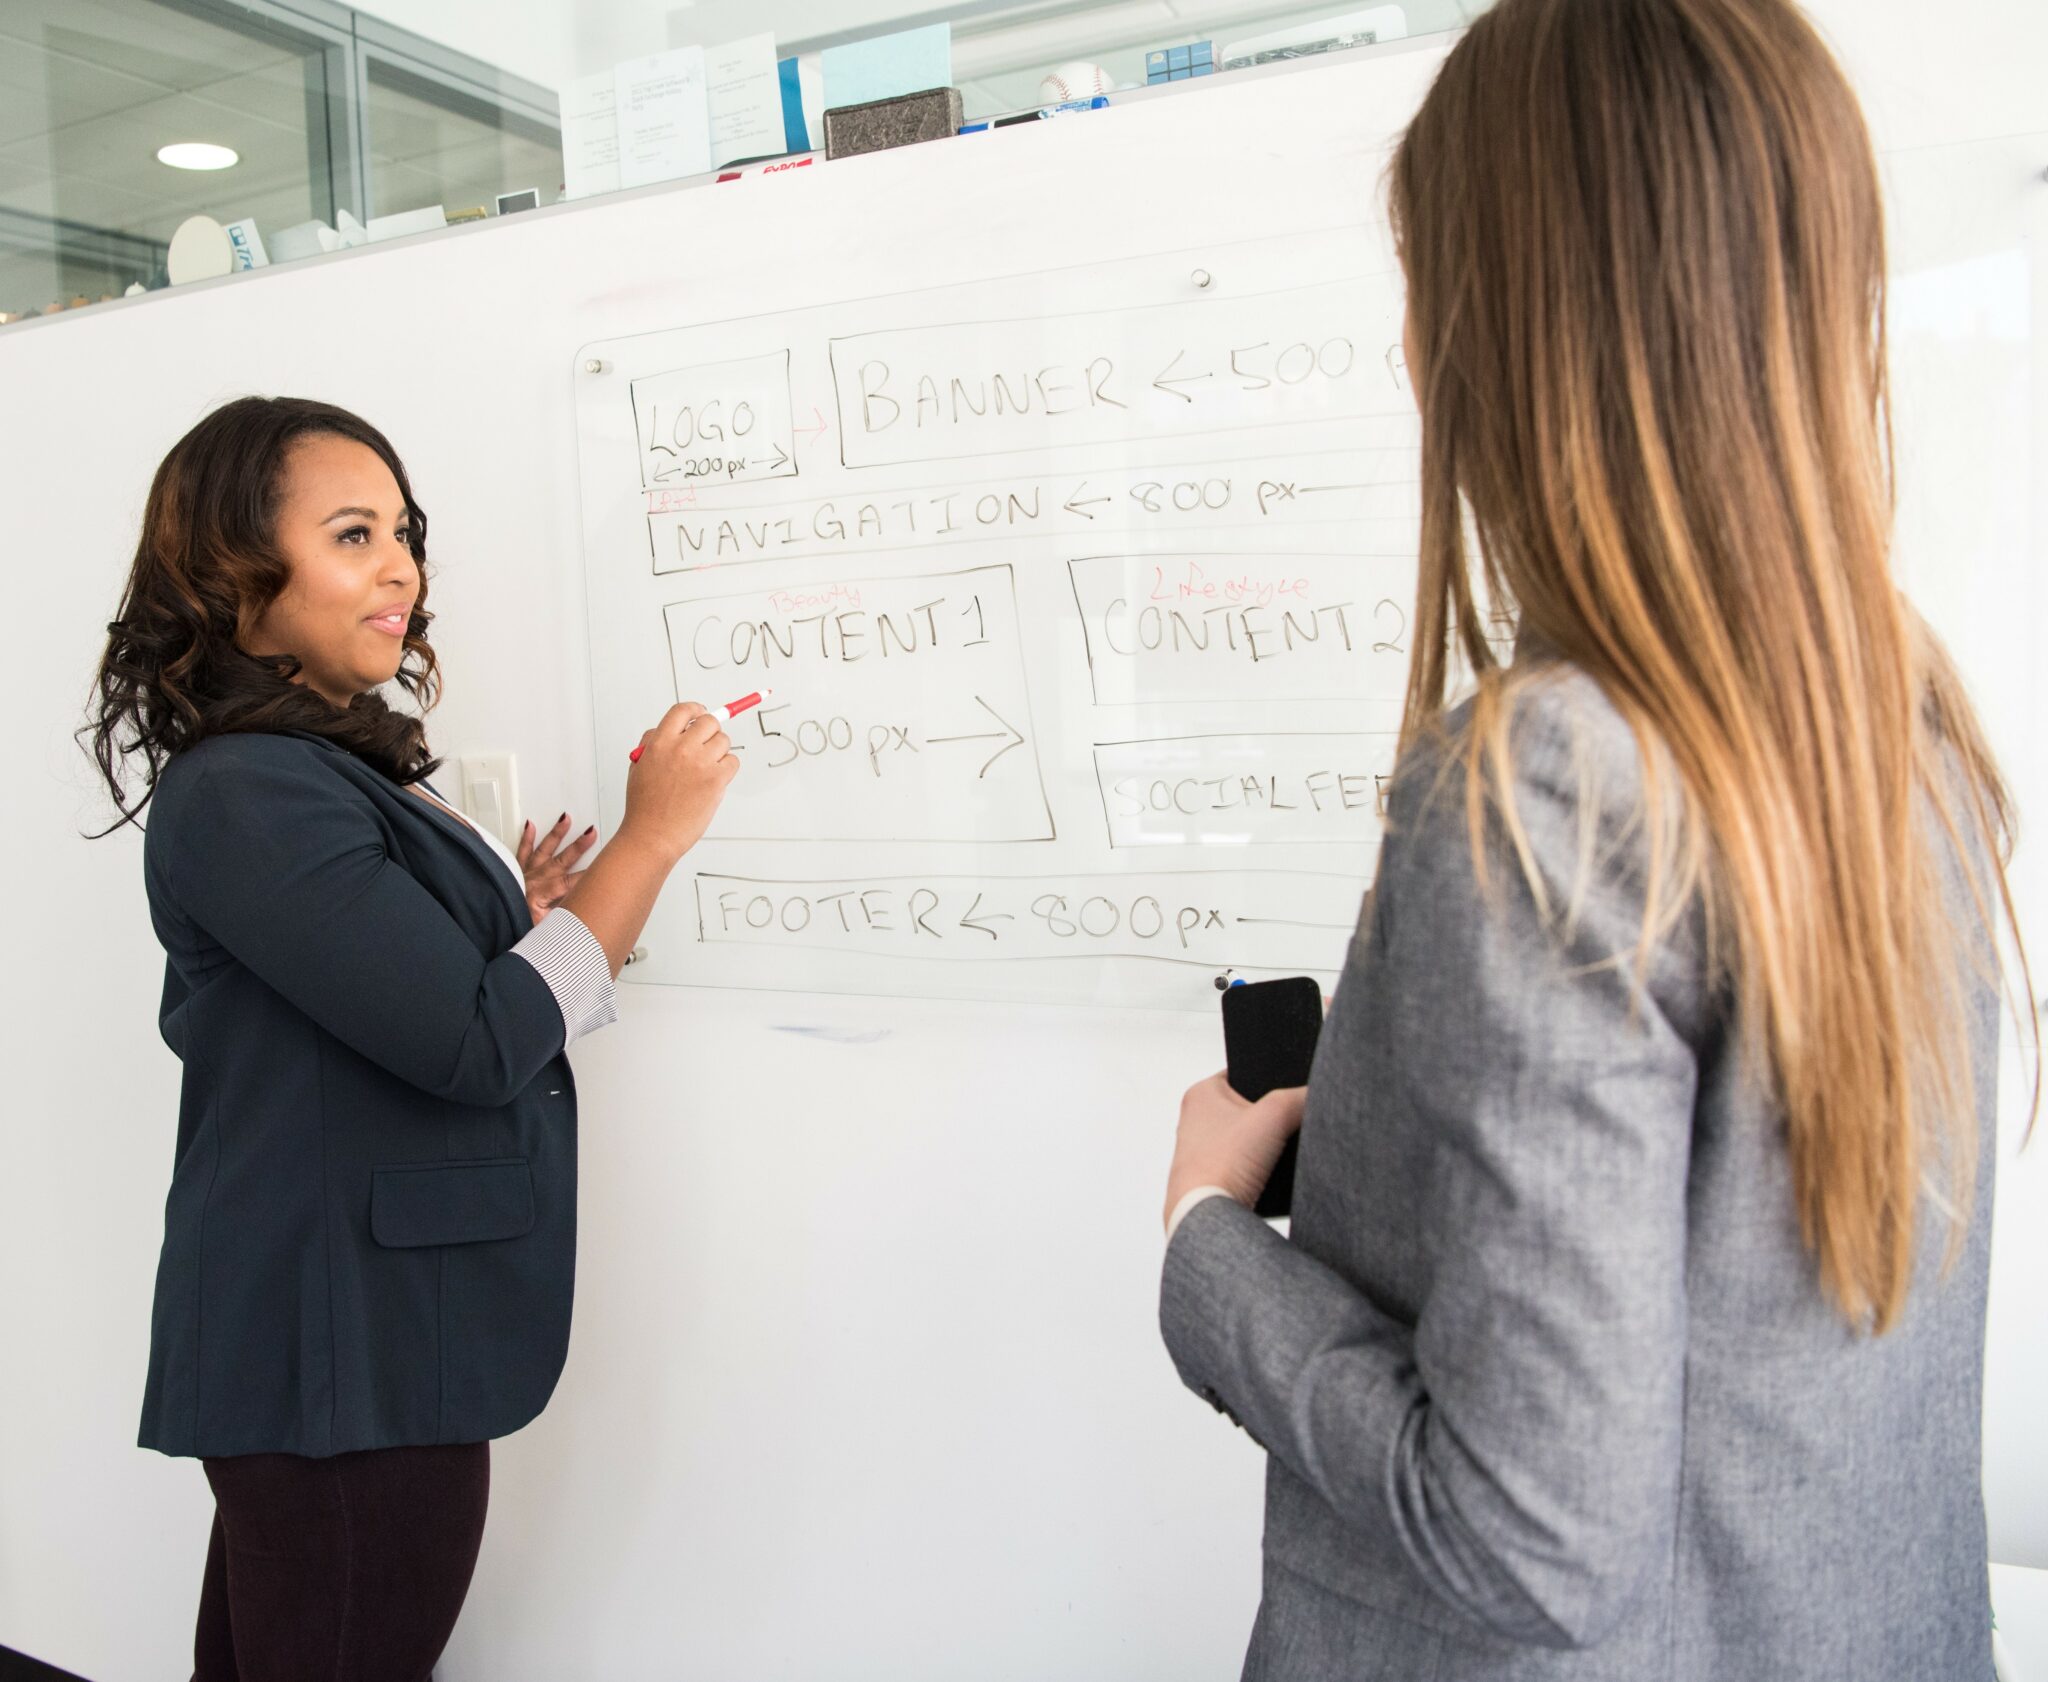 Two women using a whiteboard to discuss a topic.